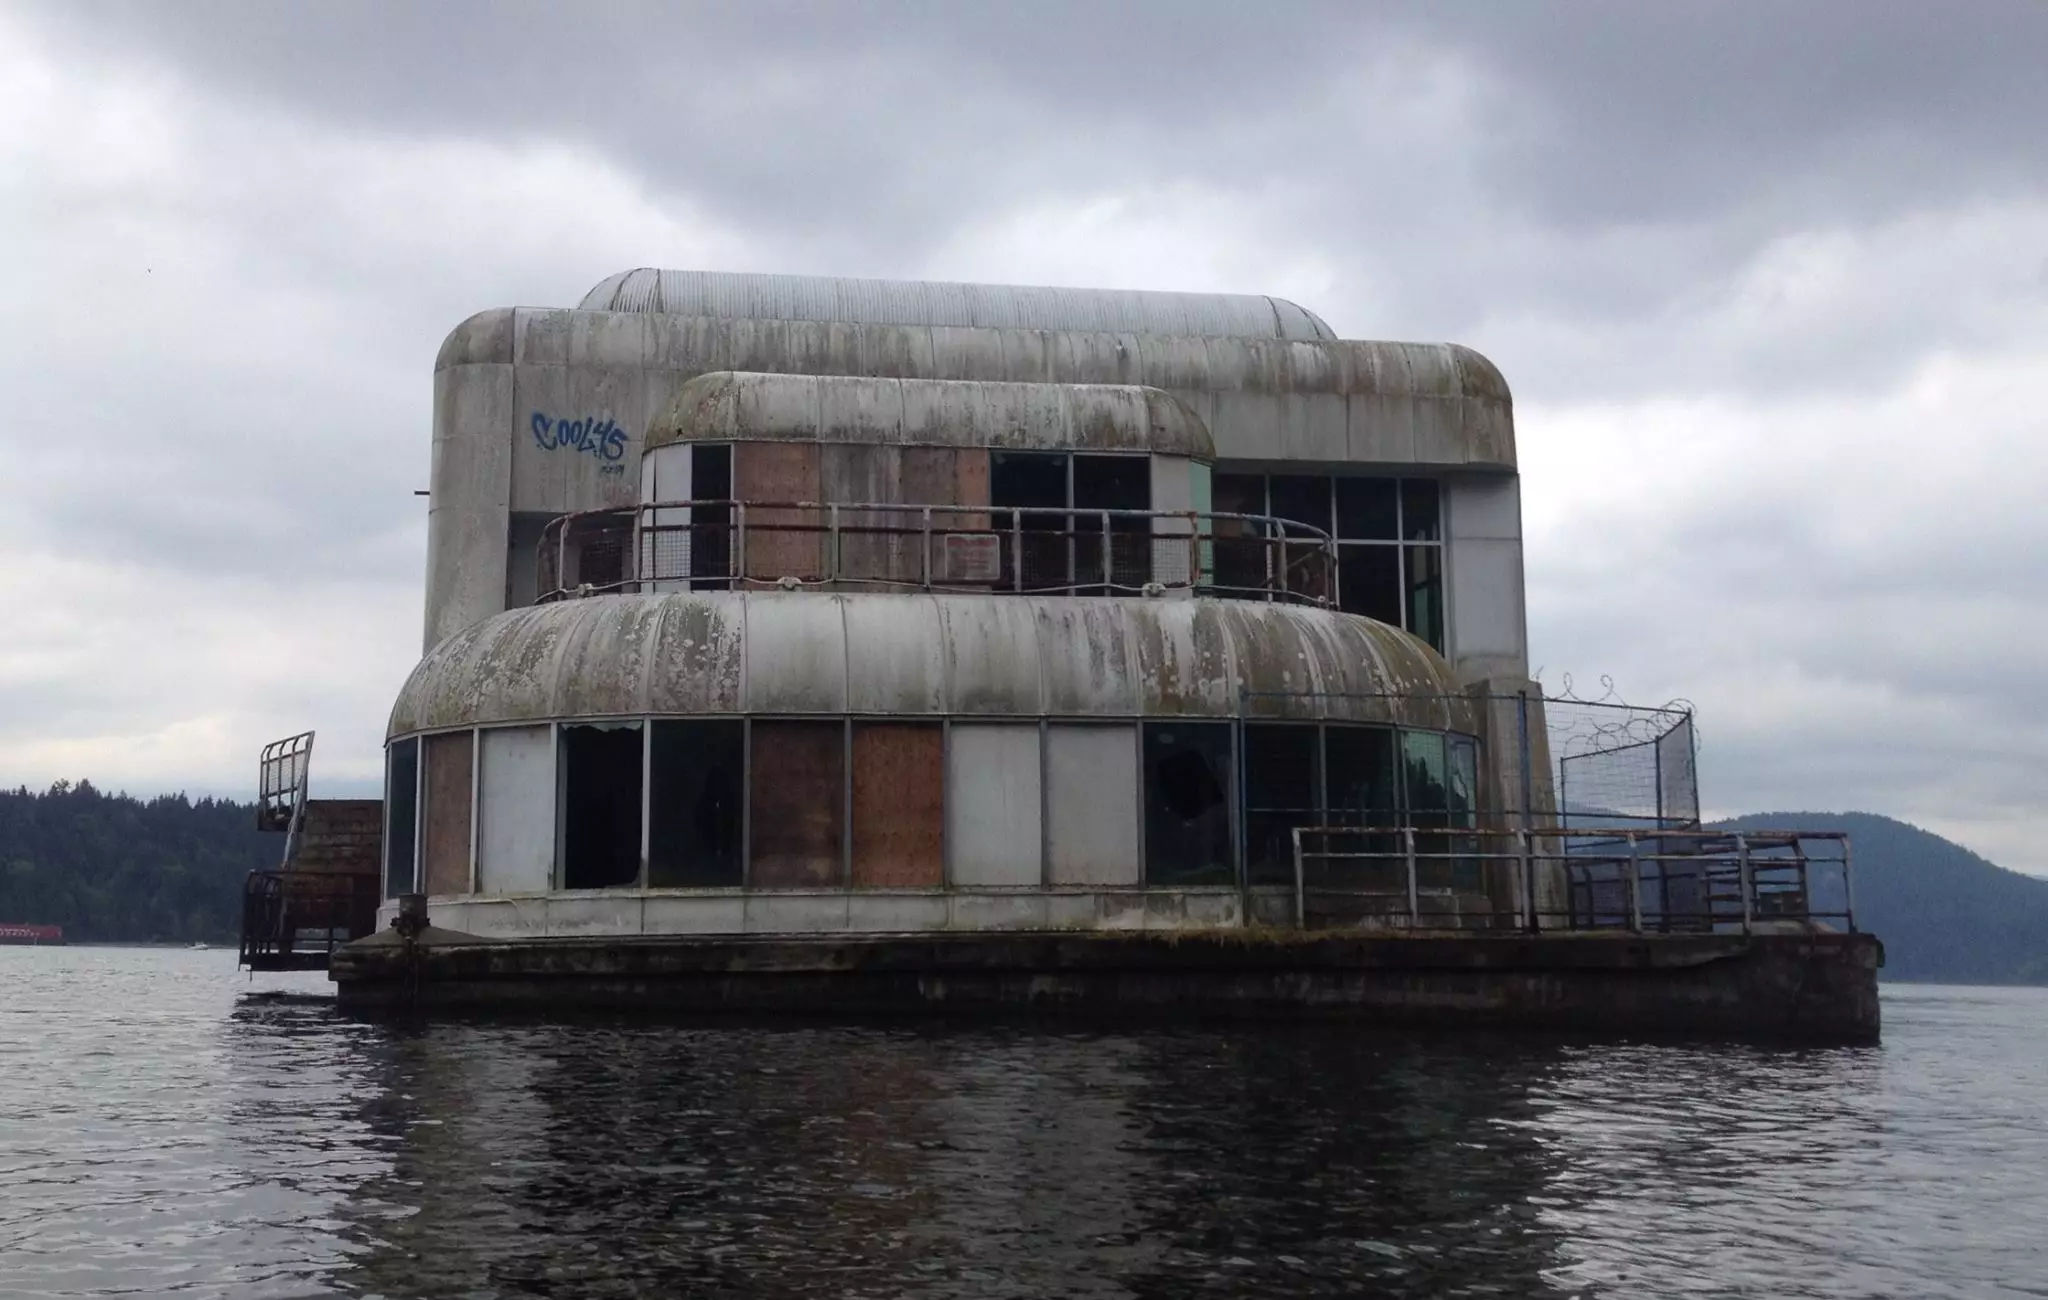 This Floating McDonald's Was Abandoned For 30 Years, And It's Creepy As Hell